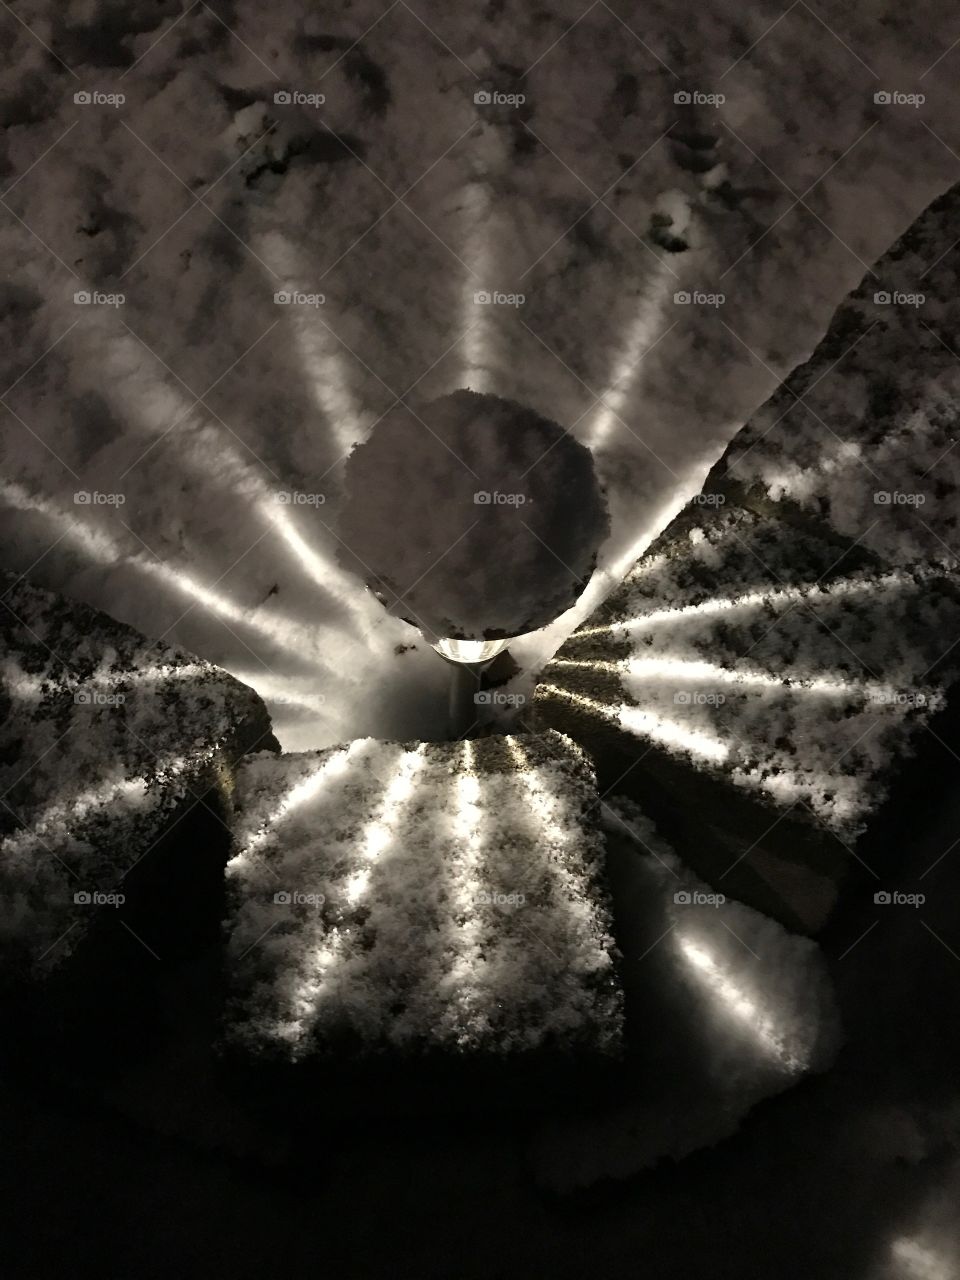 Light in the snow